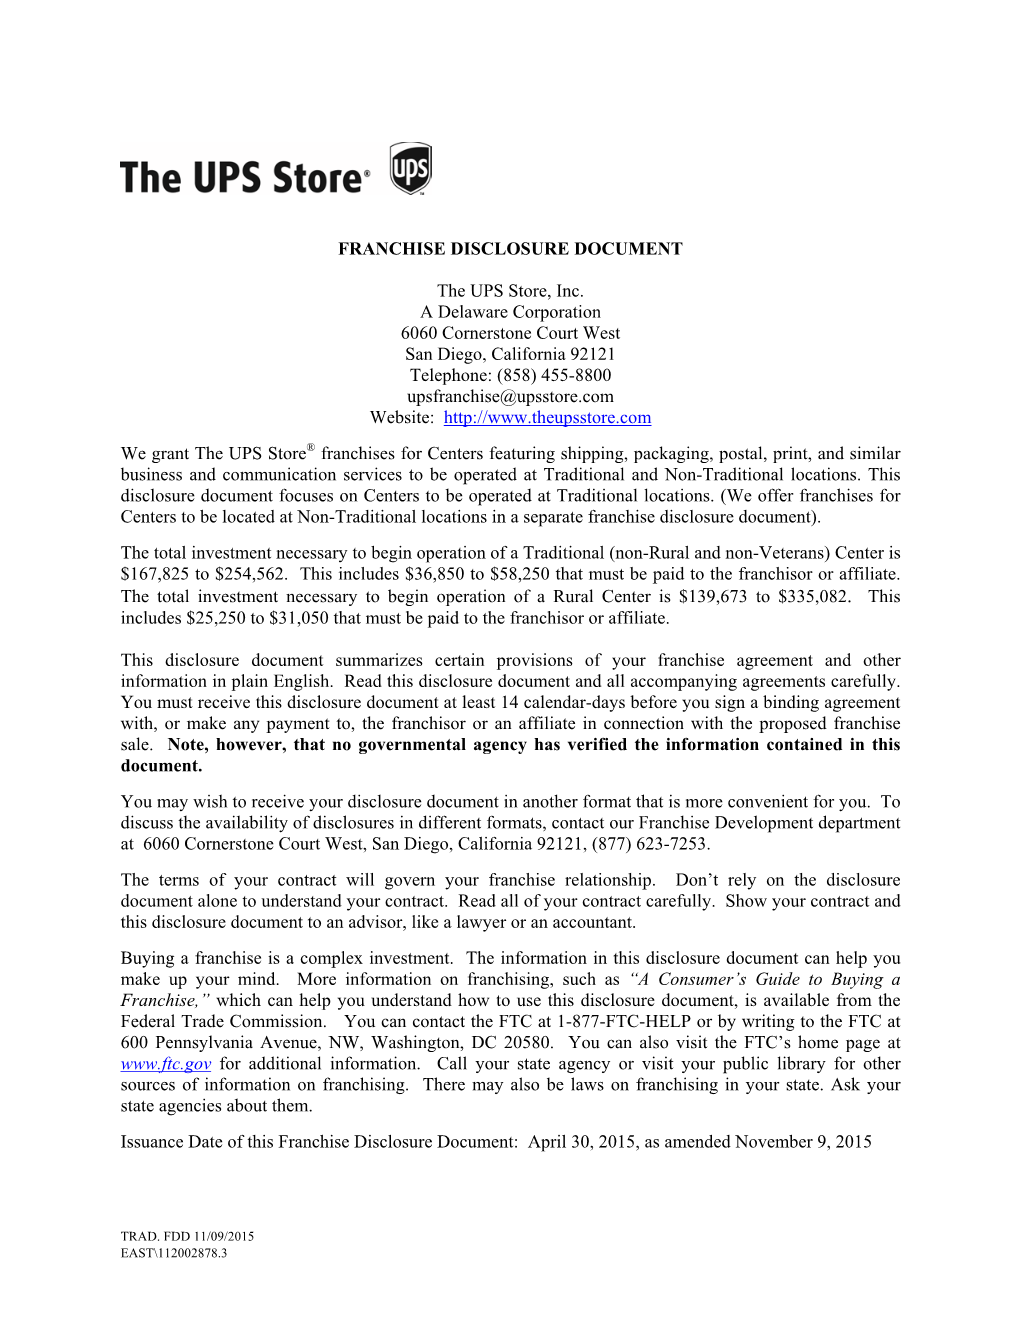 The UPS Store Franchise Disclosure Document;